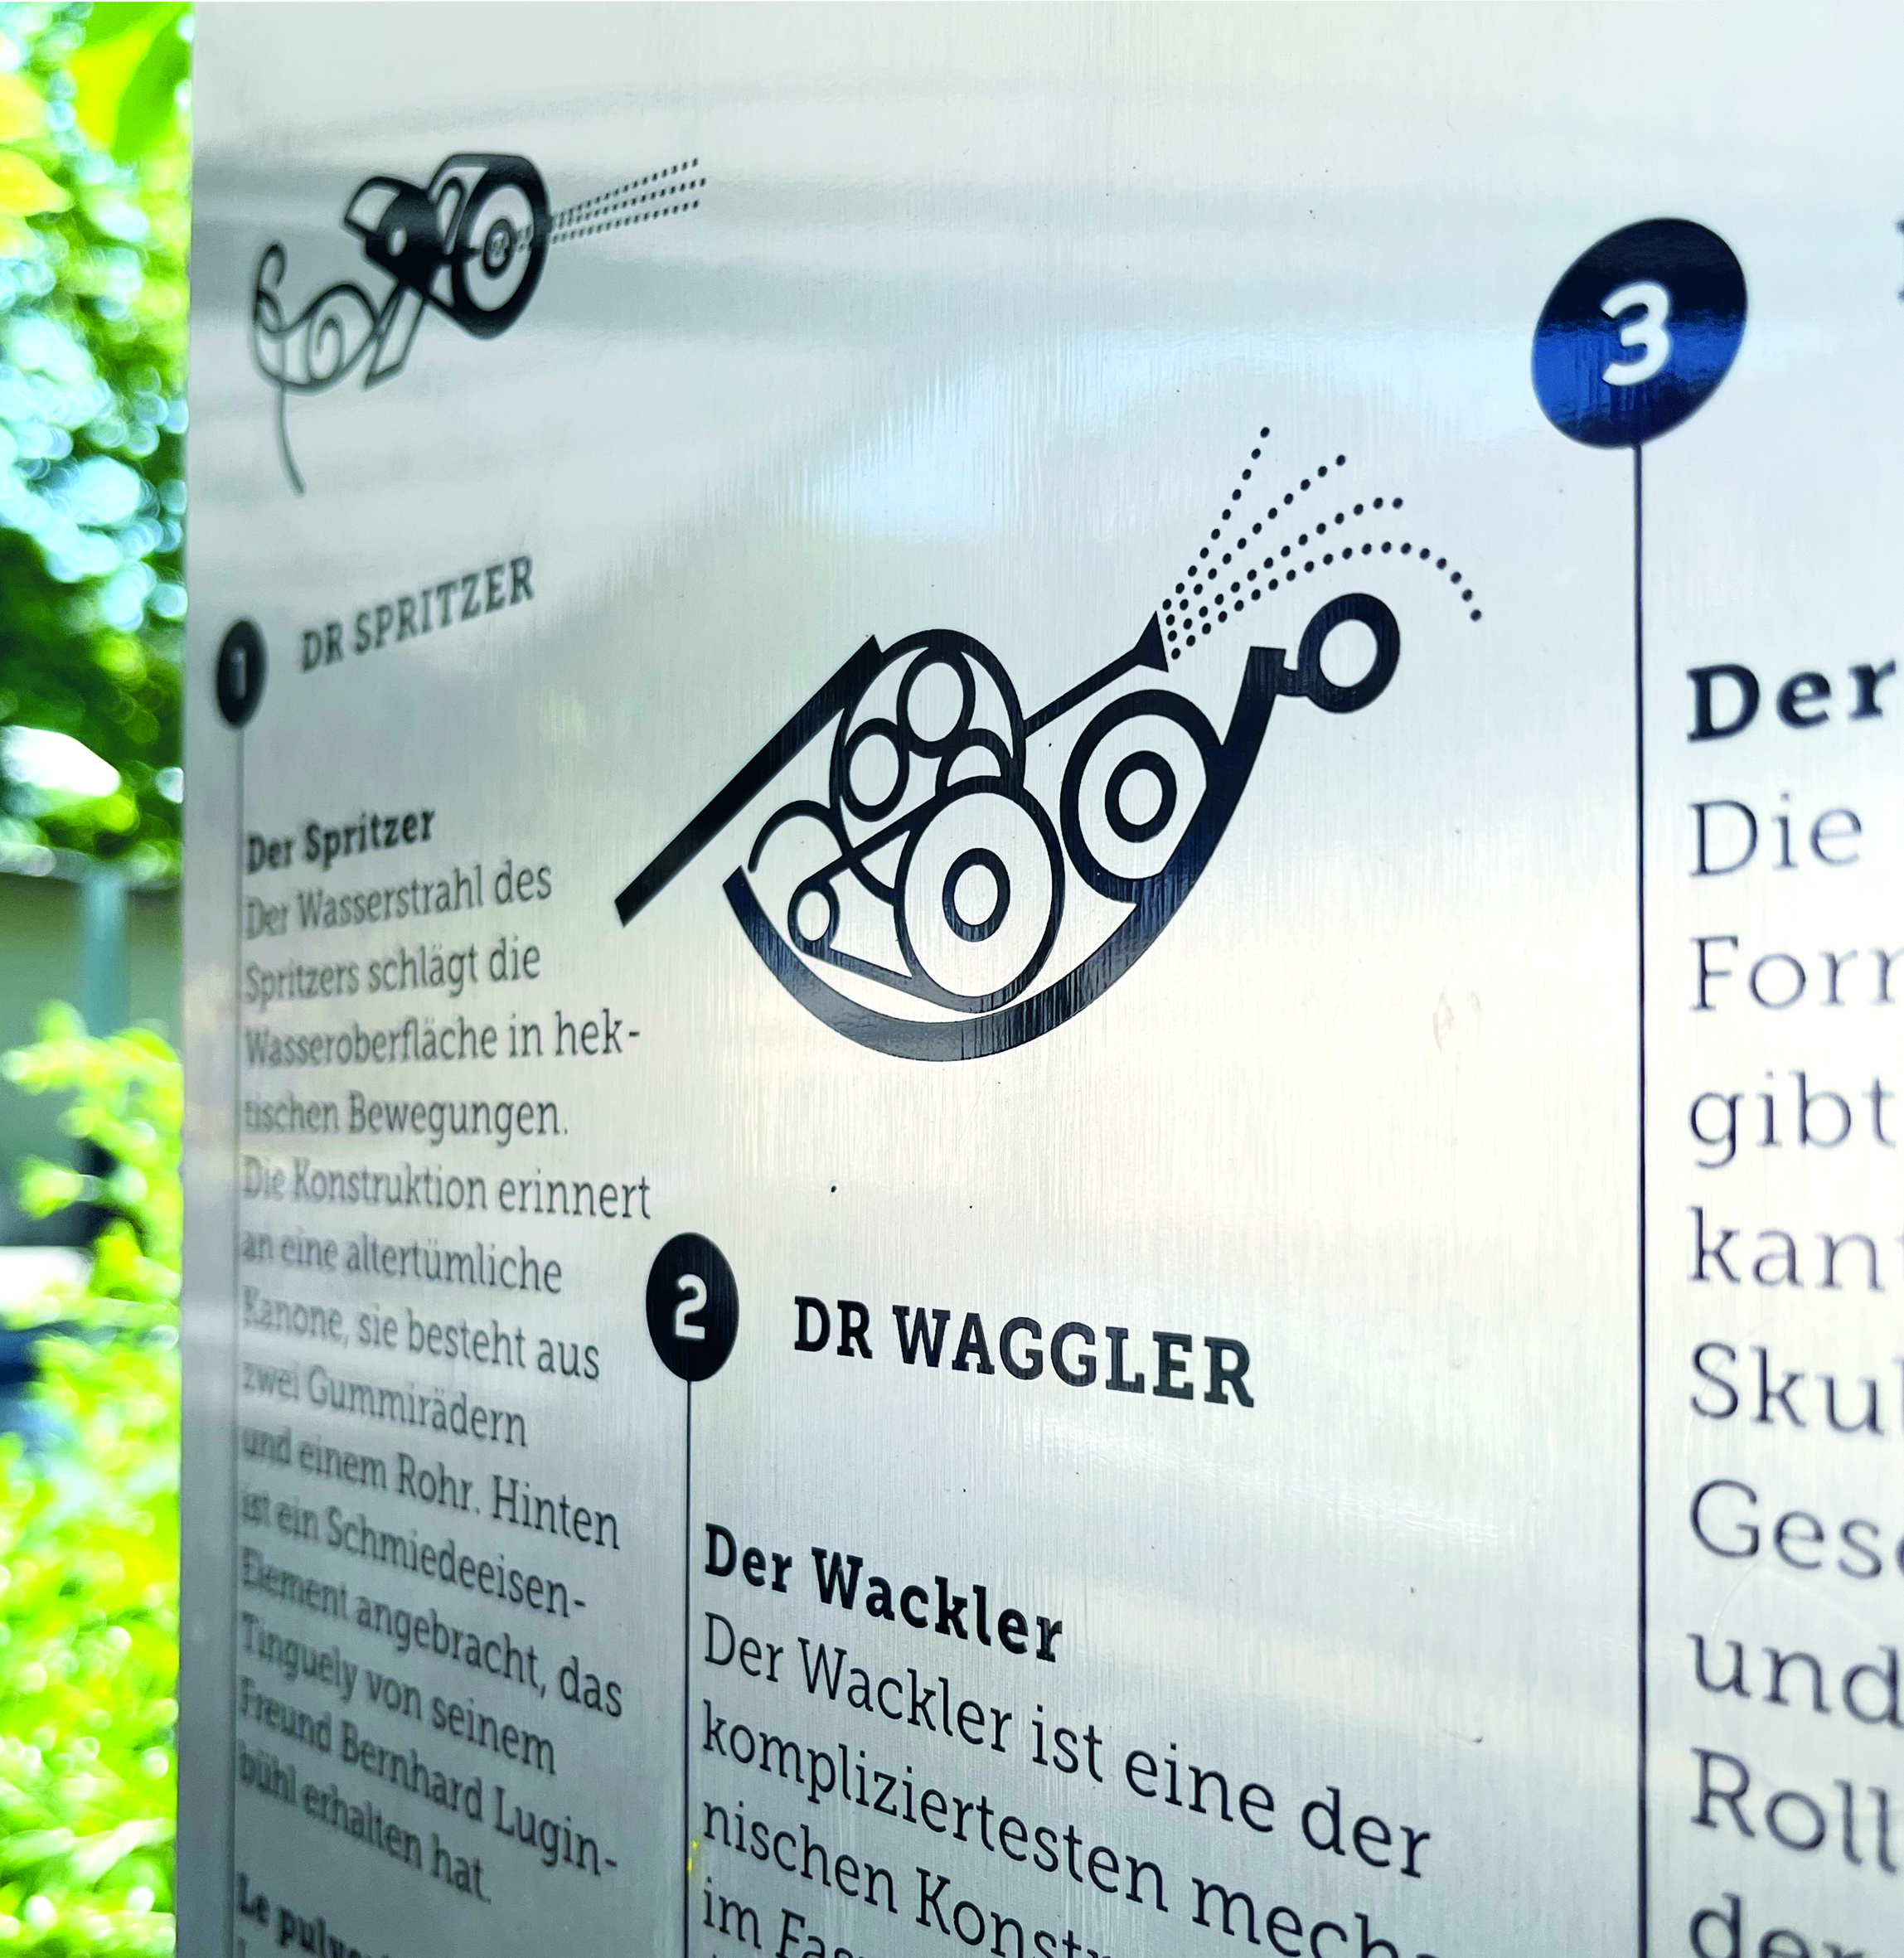 https://www.sarahweishaupt.ch/media/pages/home/illustrationen-schild-fasnachtsbrunnen-museum-tinguely-basel/335f686bad-1685531159/img_5102.jpg